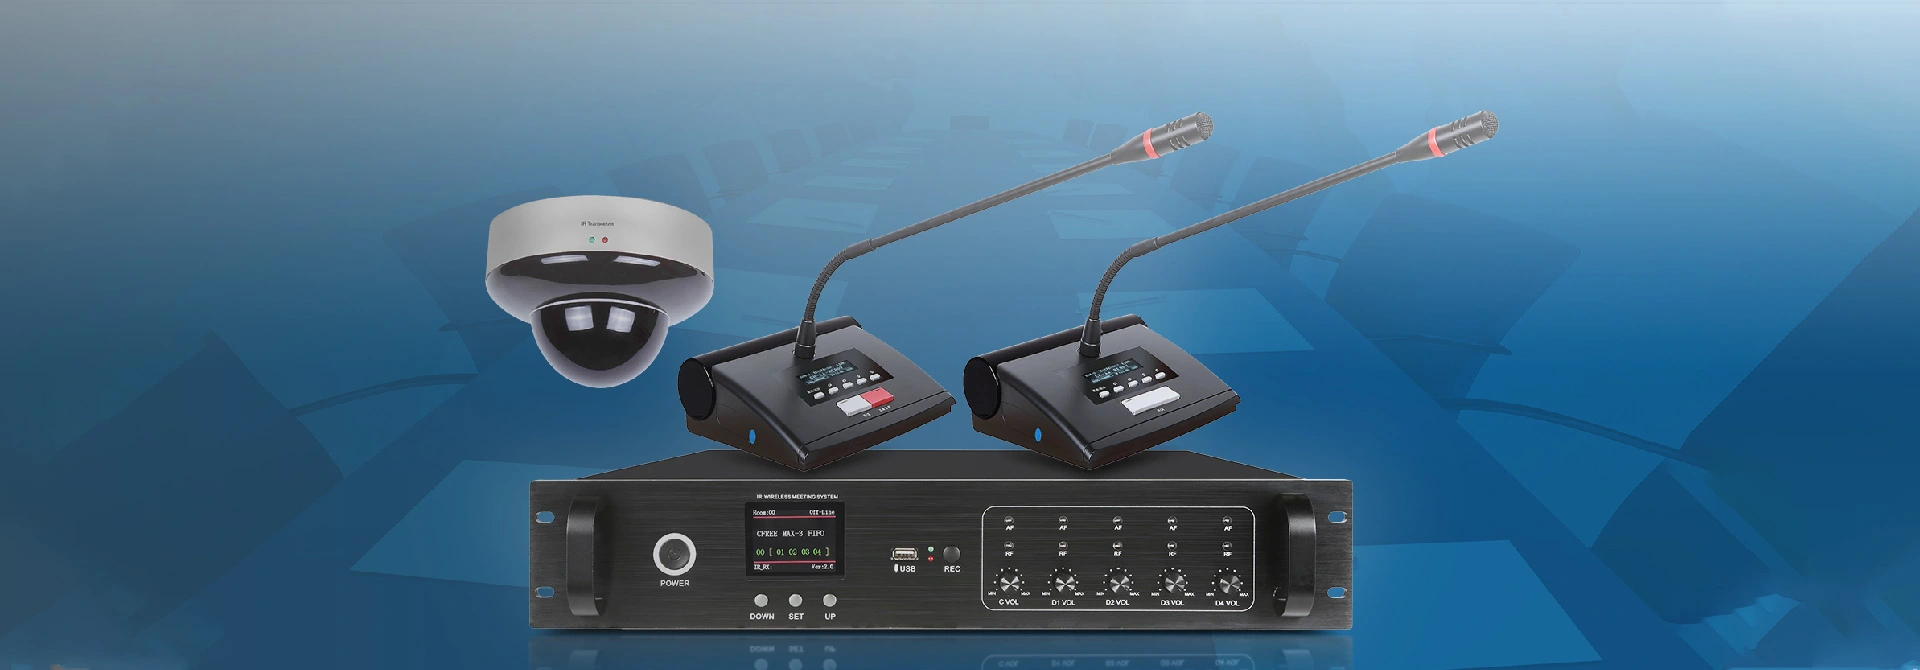 Infrared Wireless Conference System Solution for Conference Room D6701